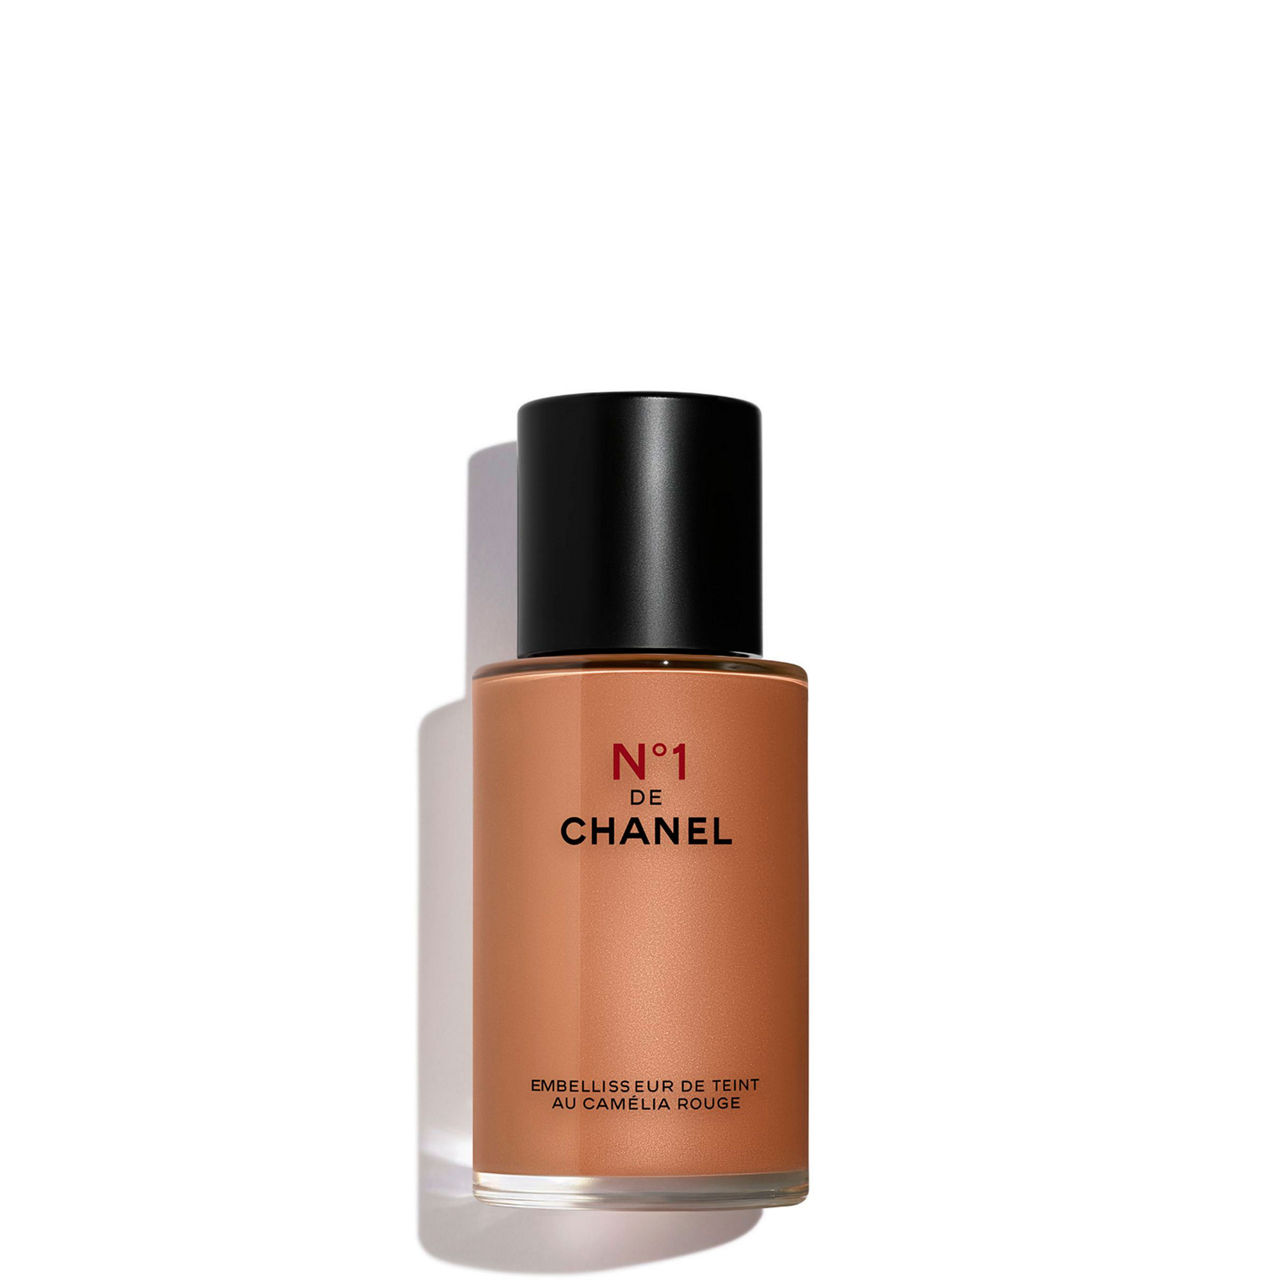 Coming soon: Chanel Vitalumiere Loose Powder Foundation and Le Blanc de  Chanel in a pump bottle! - DisneyRollerGirl